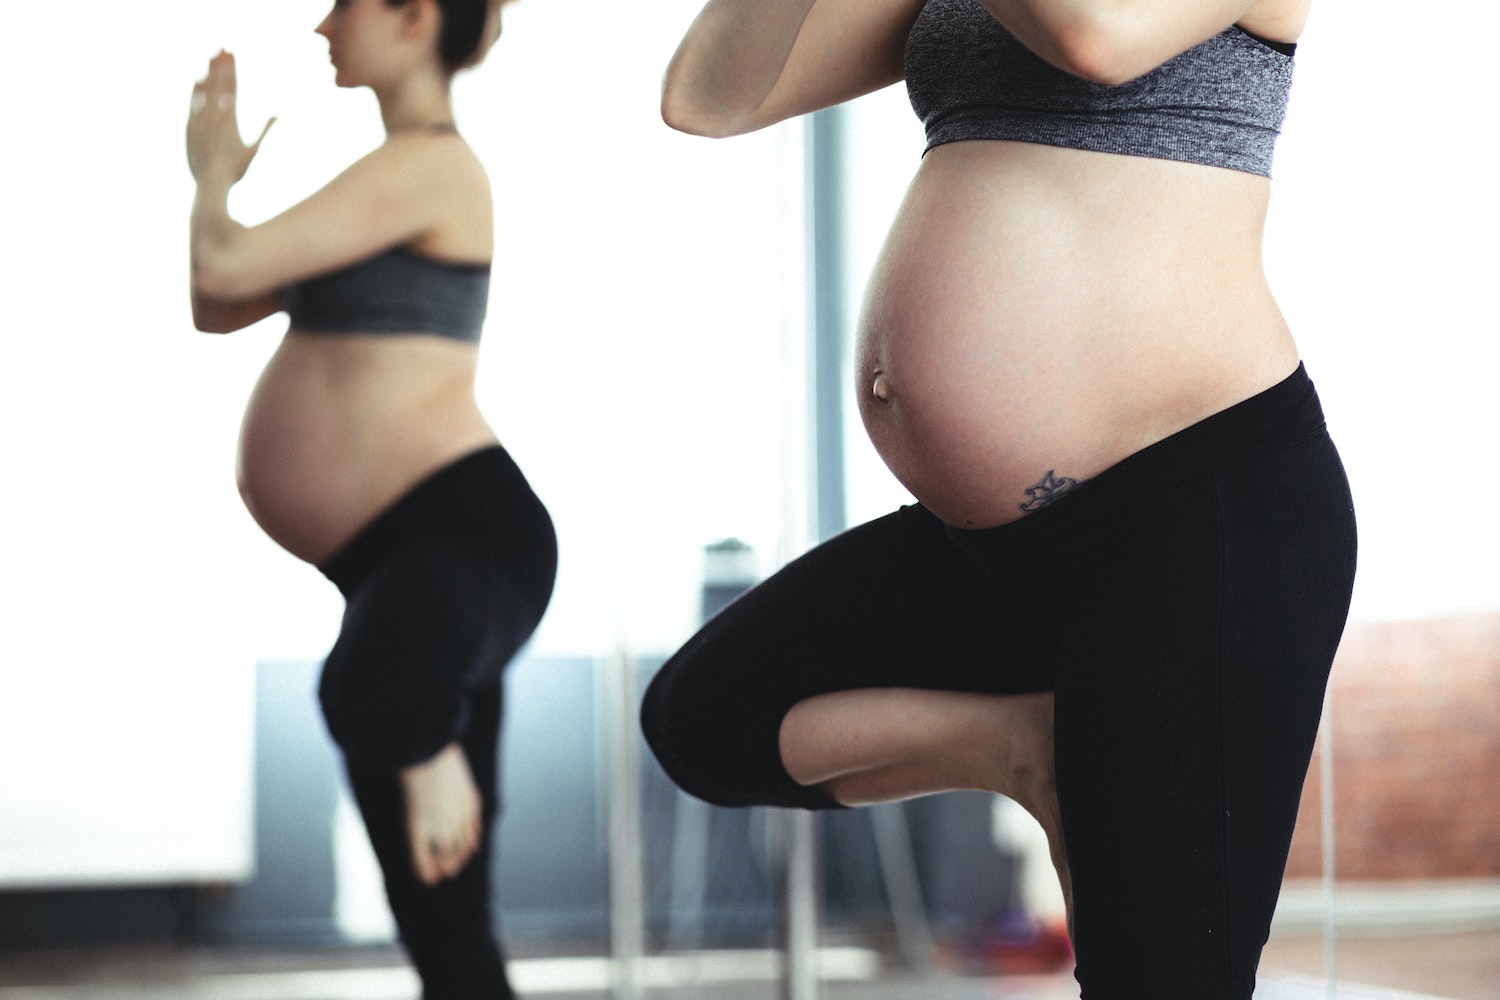 Looking after your pelvic floor during pregnancy